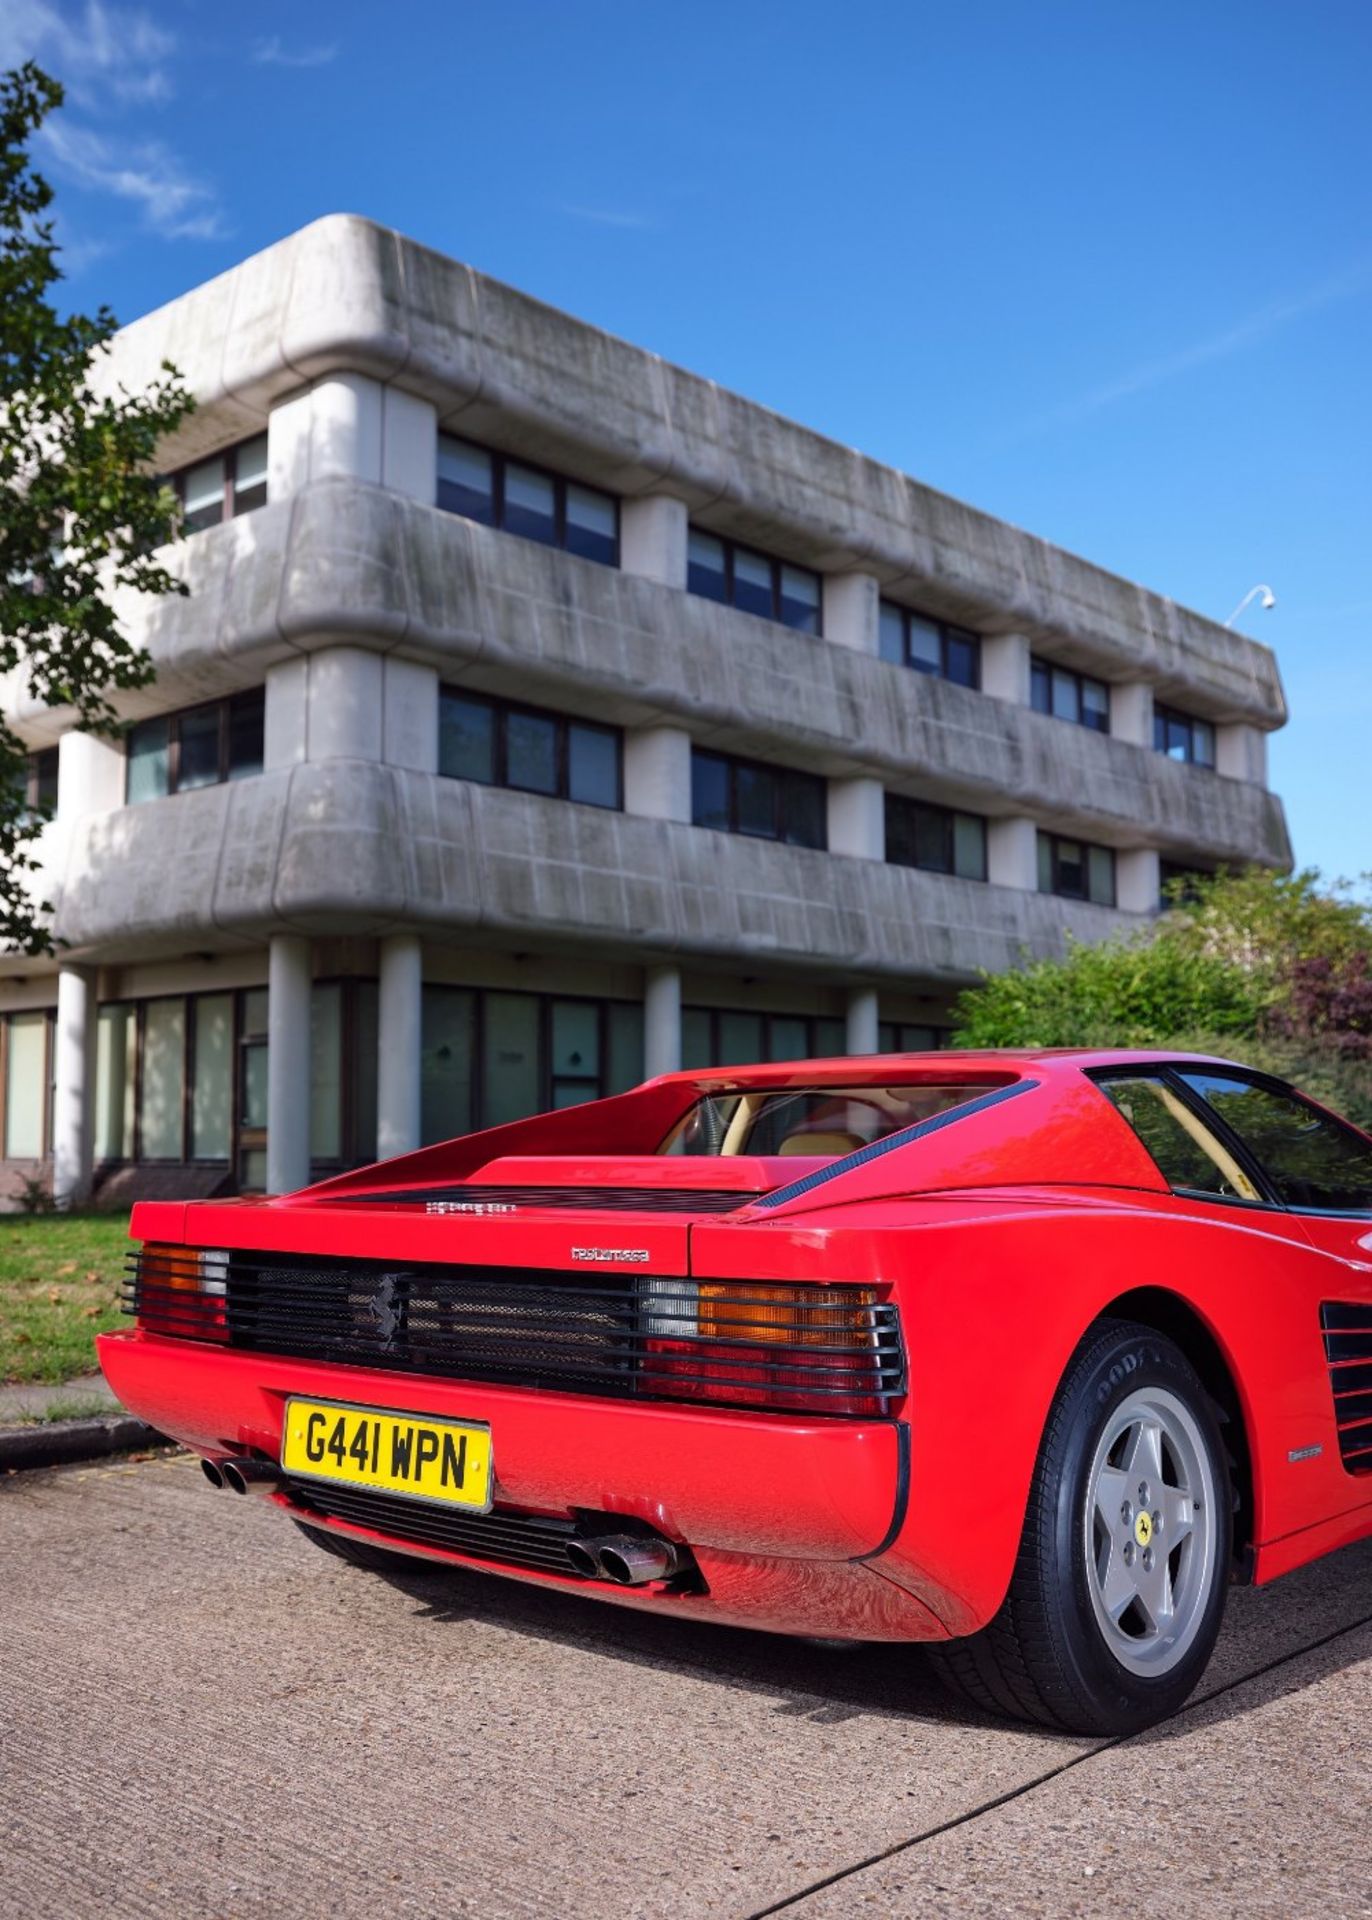 1989 FERRARI TESTAROSSA Registration Number: G441 WPN Chassis Number: ZFFAA17C000082817 Recorded - Image 9 of 59